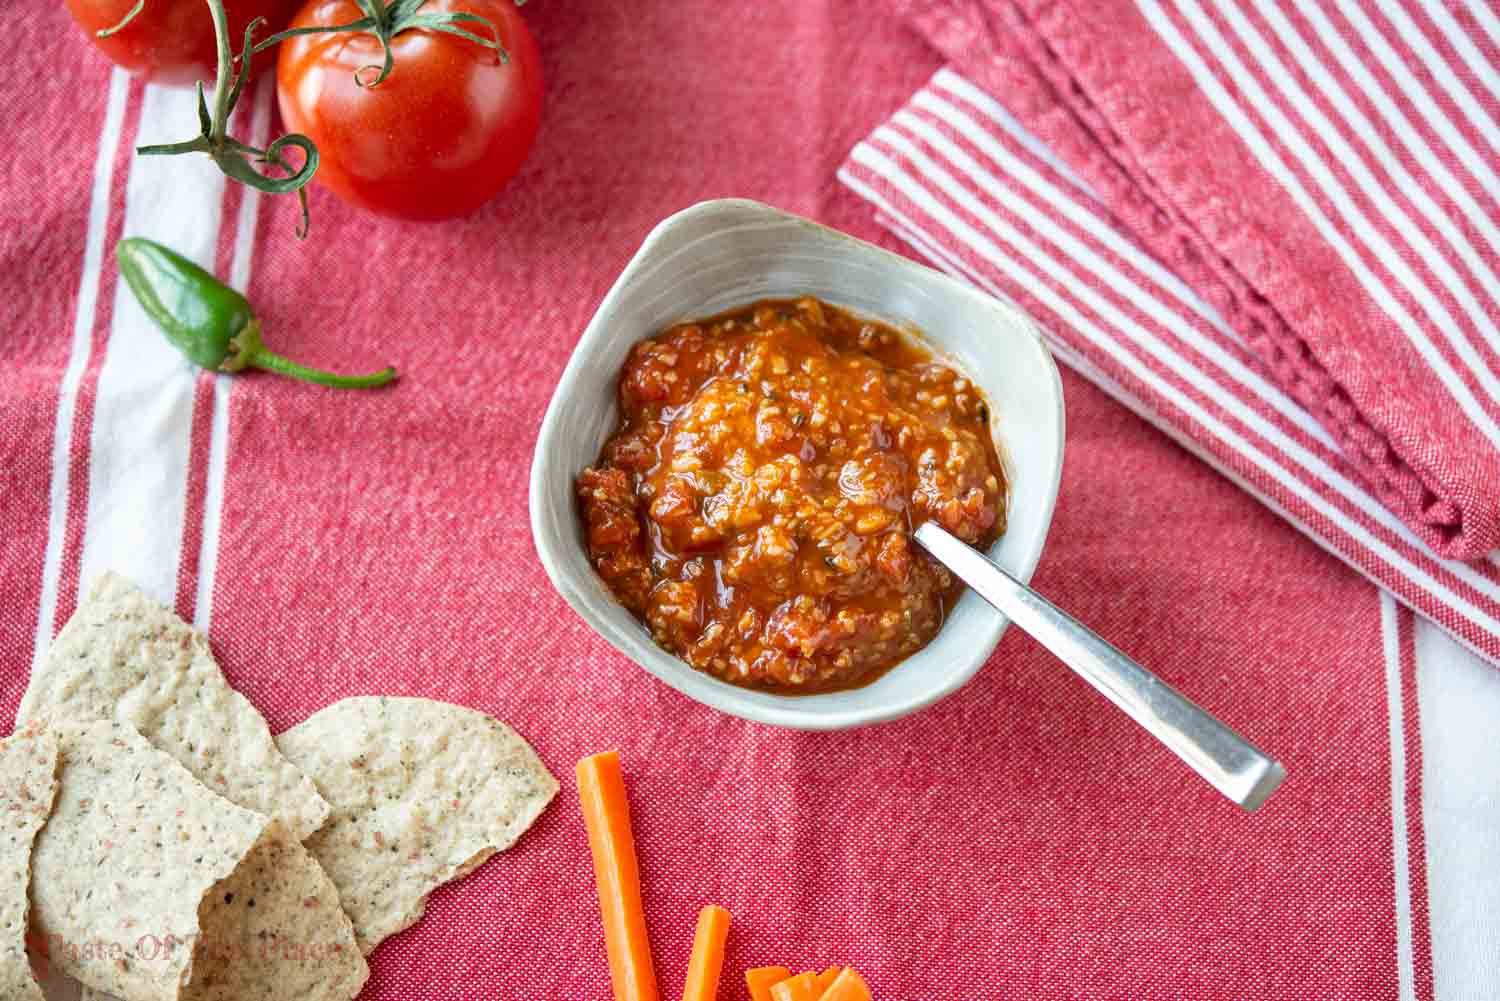 Tomato chutney with crispy crackers and carrot sticks